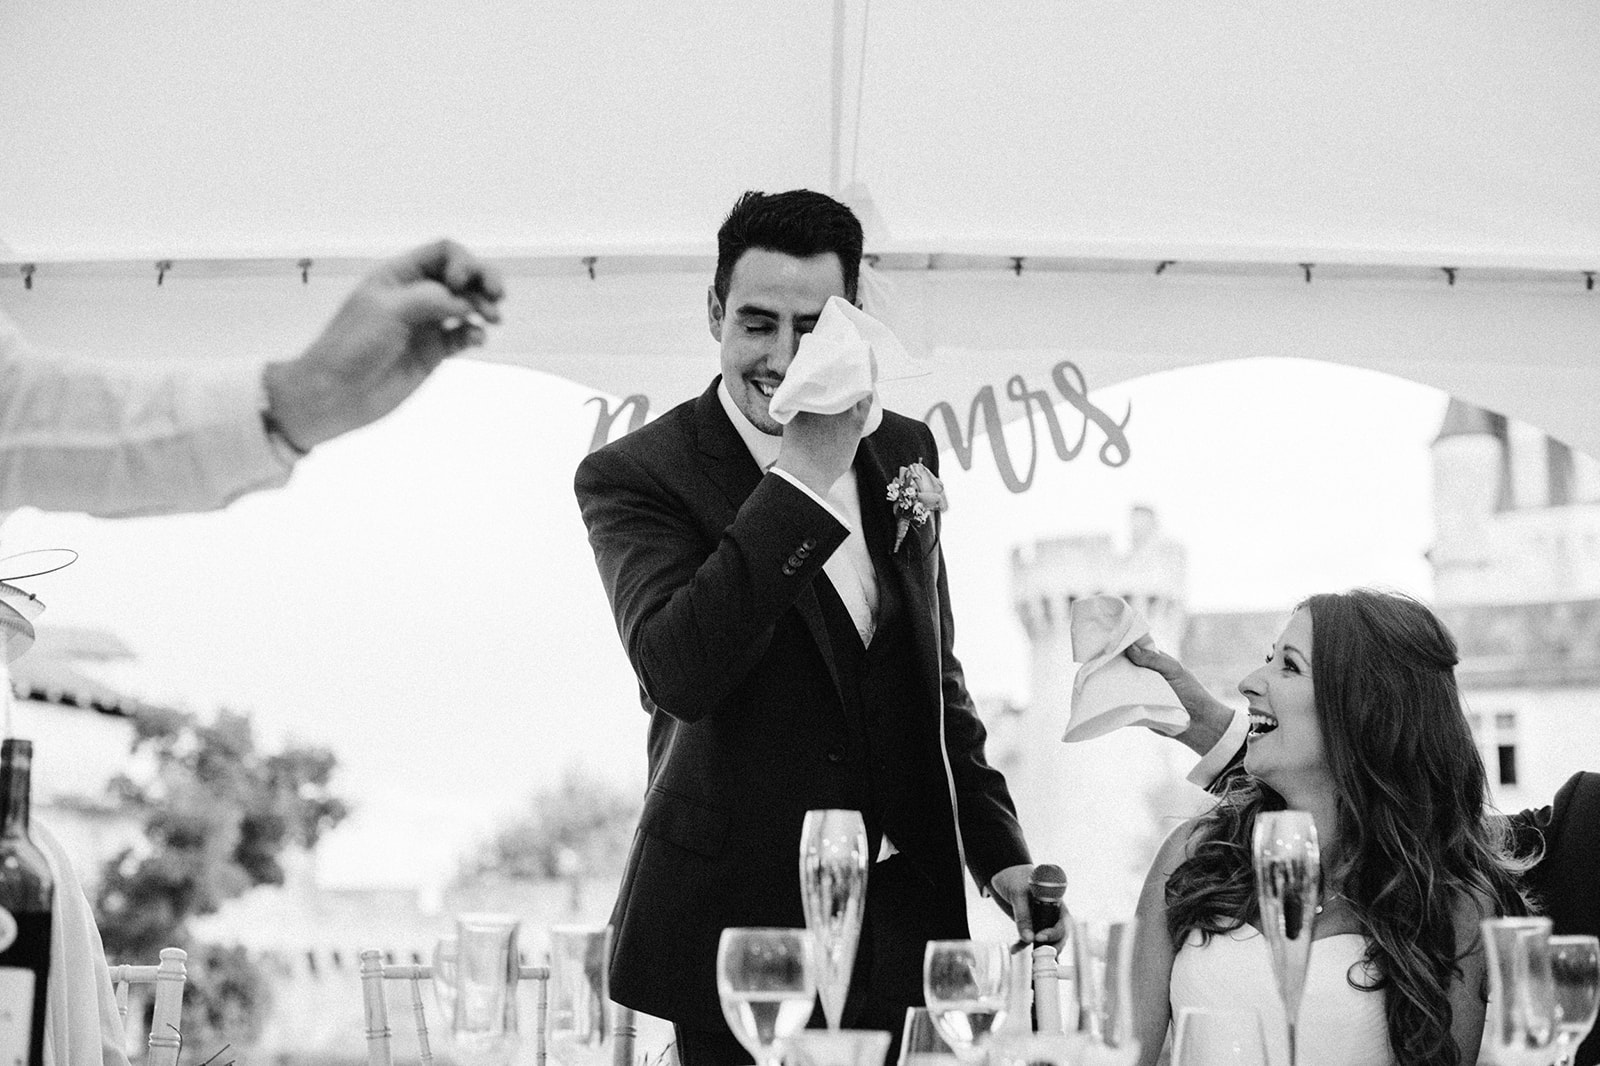 Award-winning candid photograph of a groom wiping tears with napkins passed by guests as bride laughs by his side.